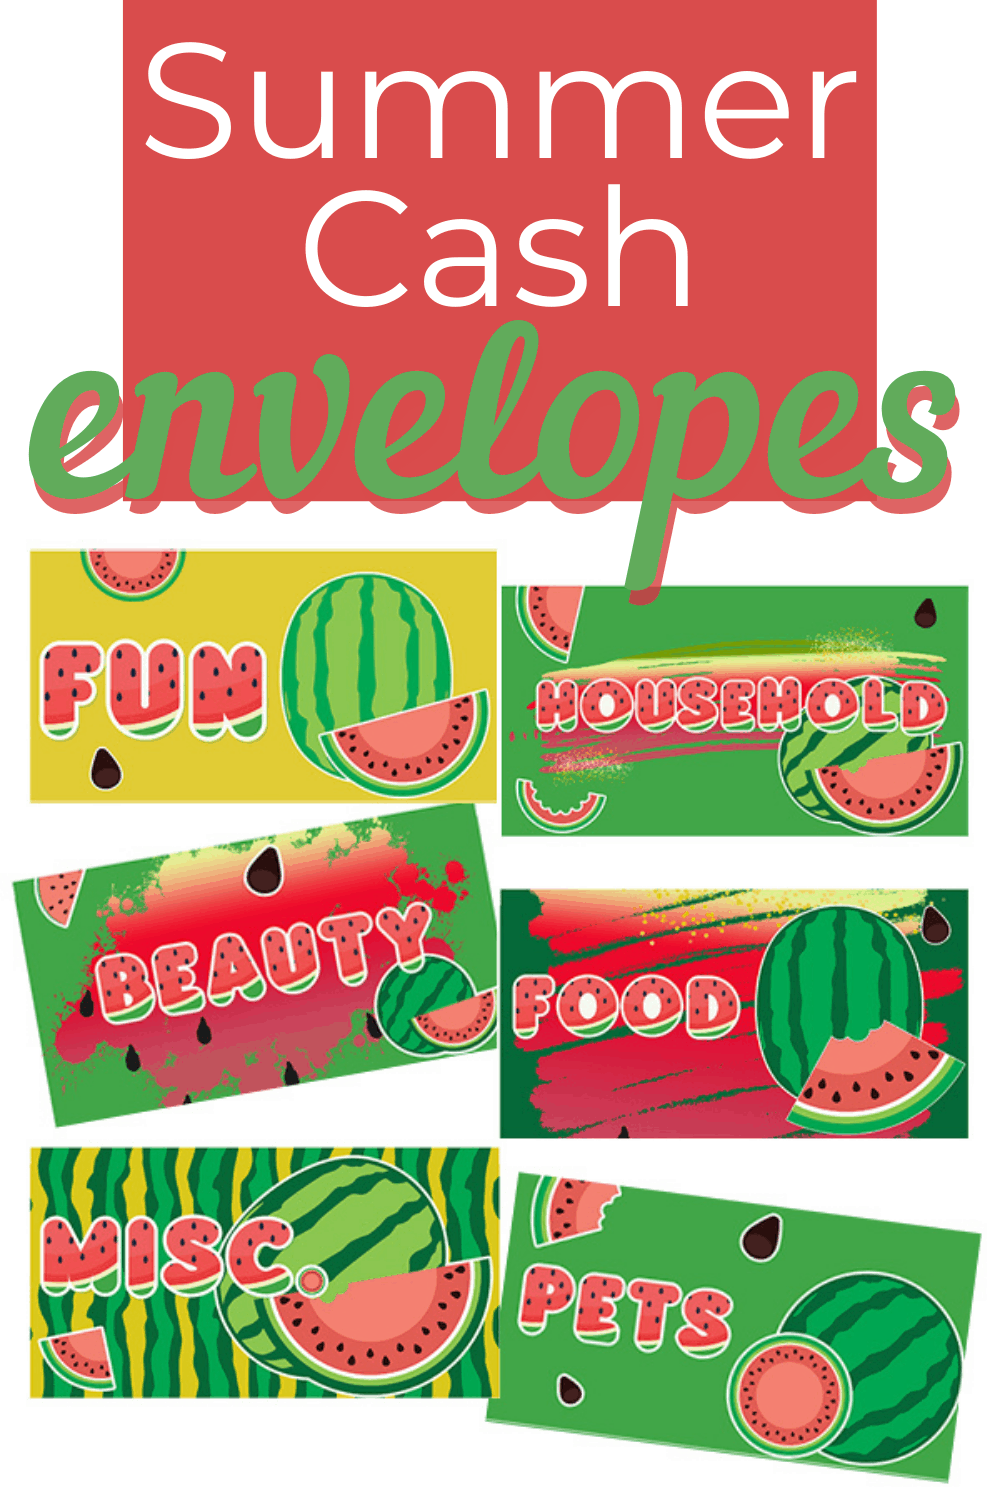 Check out these summer-themed cash envelope templates available today. Cash budget and stay organized this summer with these fun collections. via @mystayathome